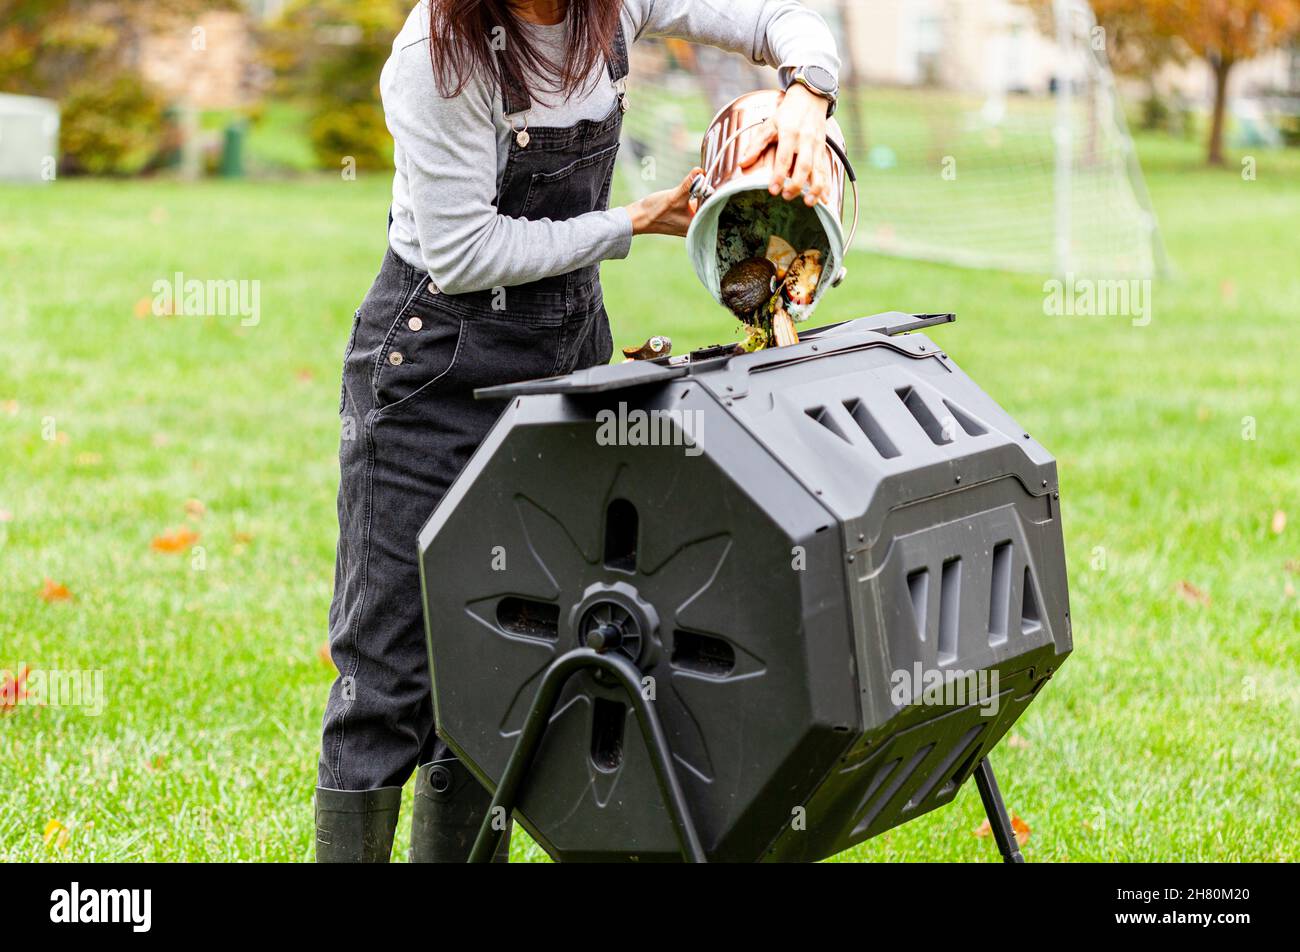 A woman is dumping a small bin of kitchen scraps into an outdoor tumbling composter in backyard garden. These plastic units with metal legs can turn a Stock Photo